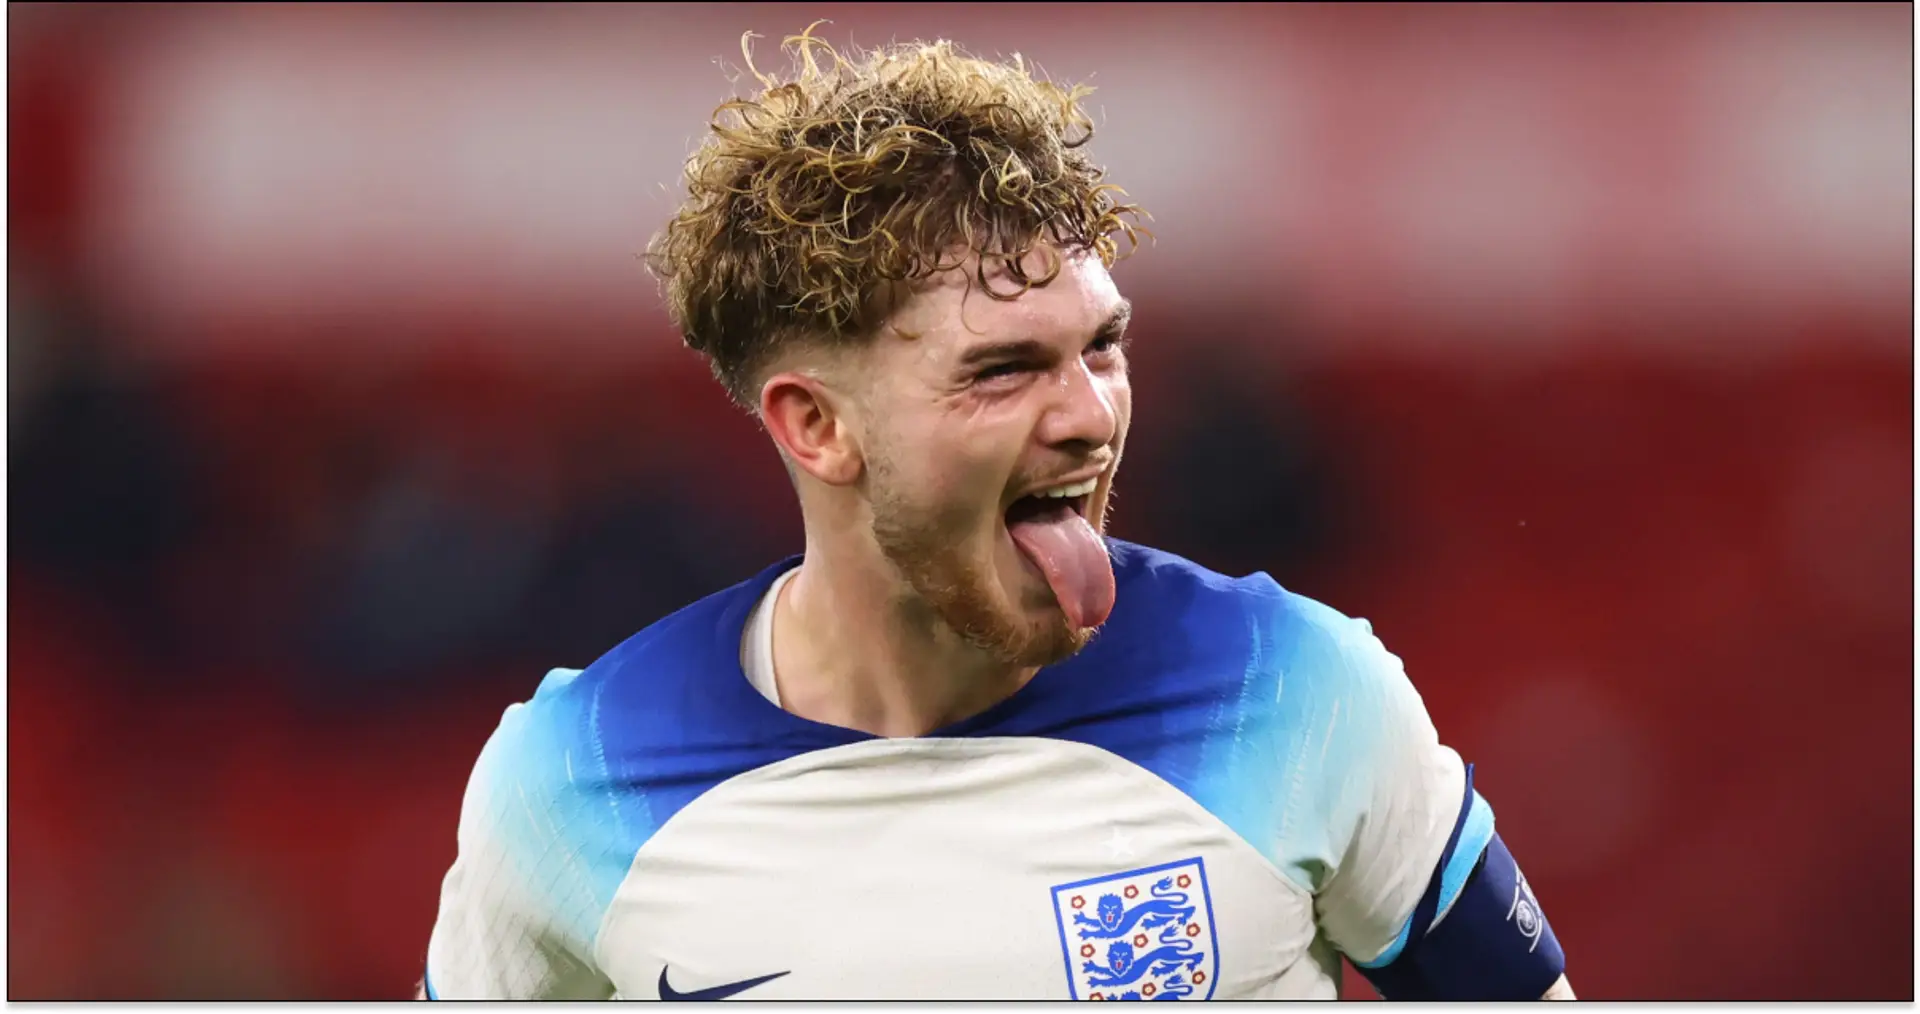 'Confidence is through the roof': Elliott reacts to captaining England U21s